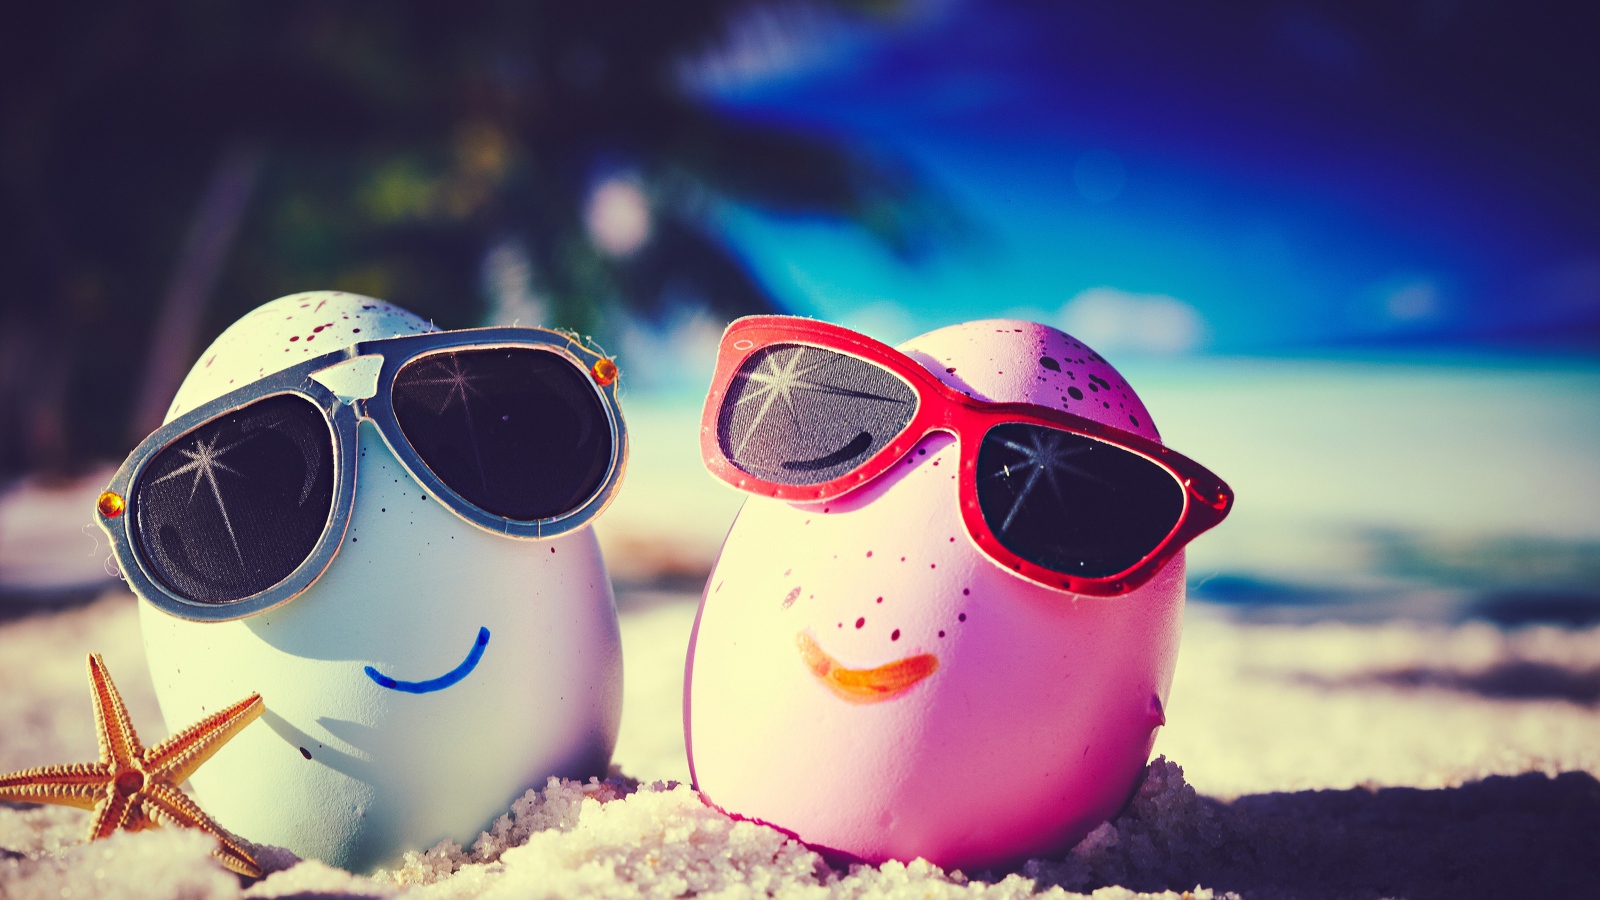 Two cool eggs in sunglasses on the beach